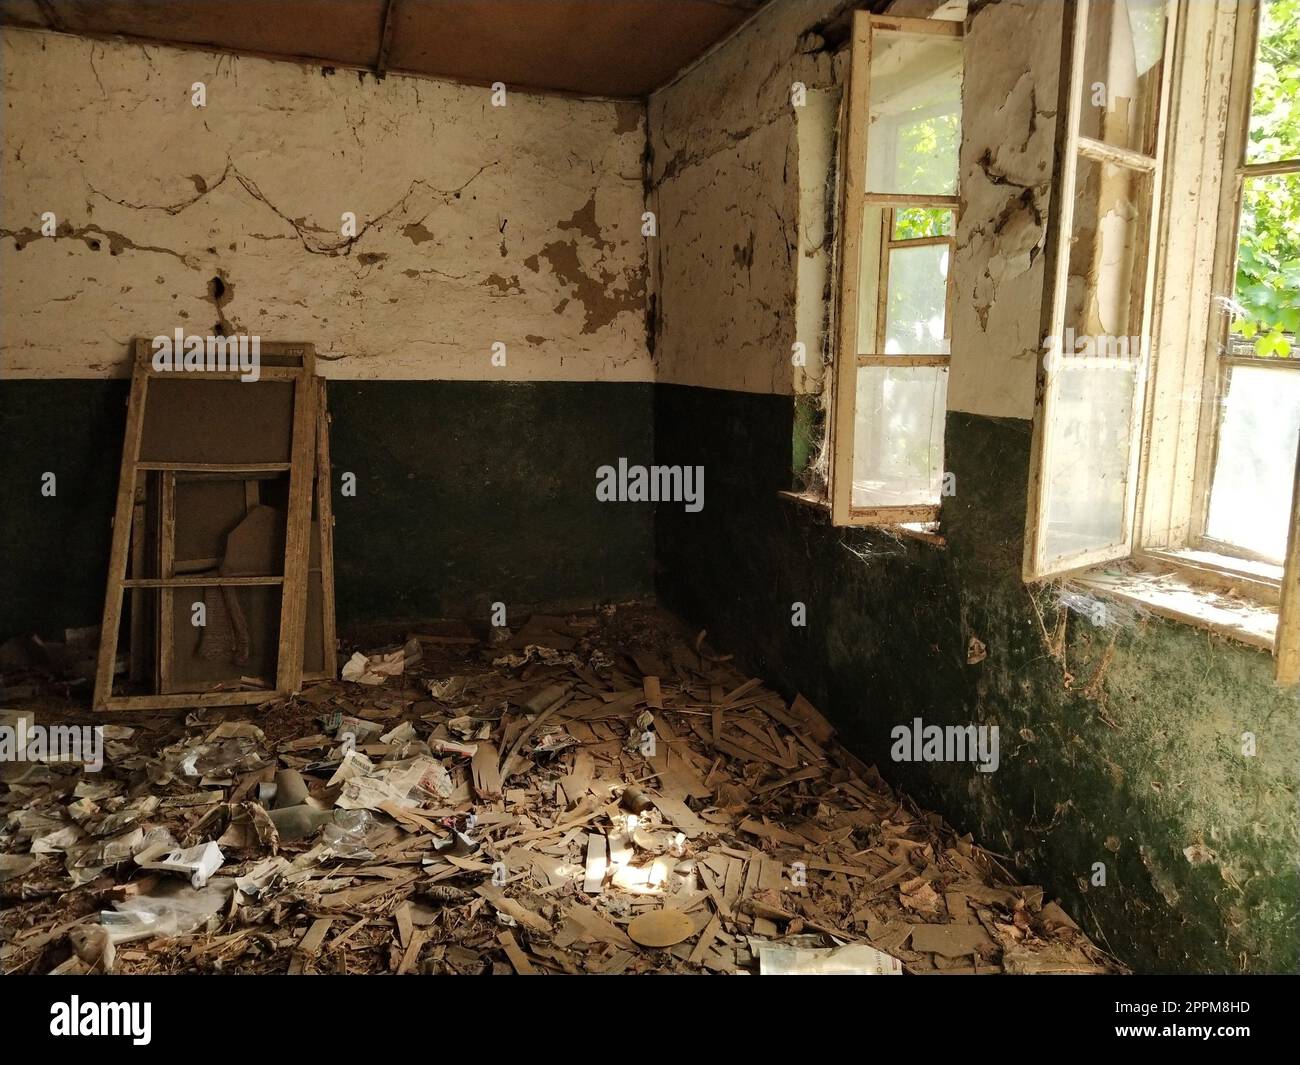 Inside abandoned house. Scattered trash on the floor. Green paint, cracks and cobwebs on the wall. The white upper half of the wall. Open windows through which sunlight shines through Frames removed Stock Photo